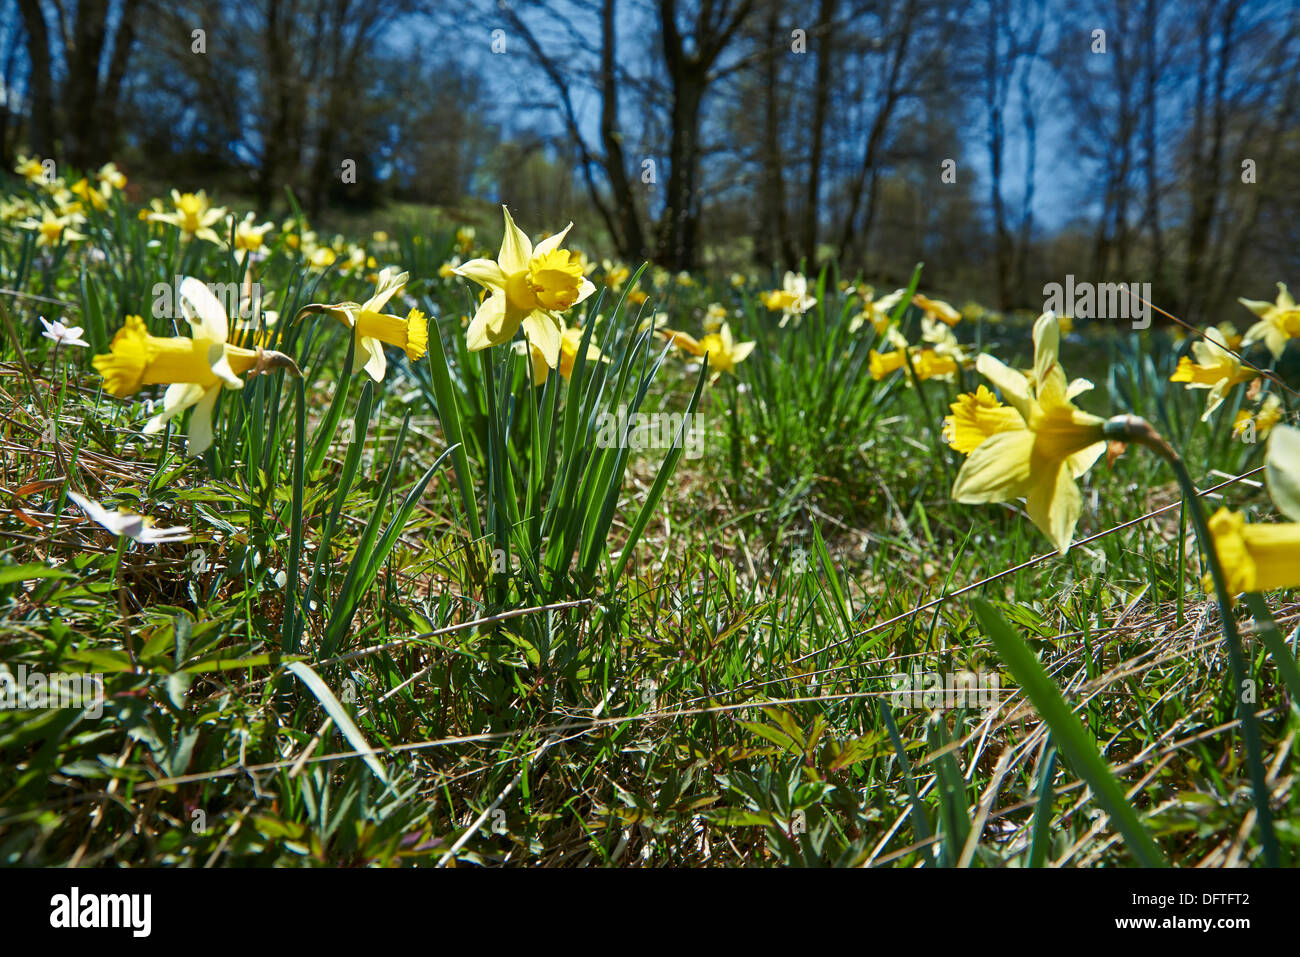 wild yellow Narcissus or Daffodils (Narcissus pseudonarcissus), Perlenbachtal, National Park Eifel, Monschau-Hoefen, Germany Stock Photo